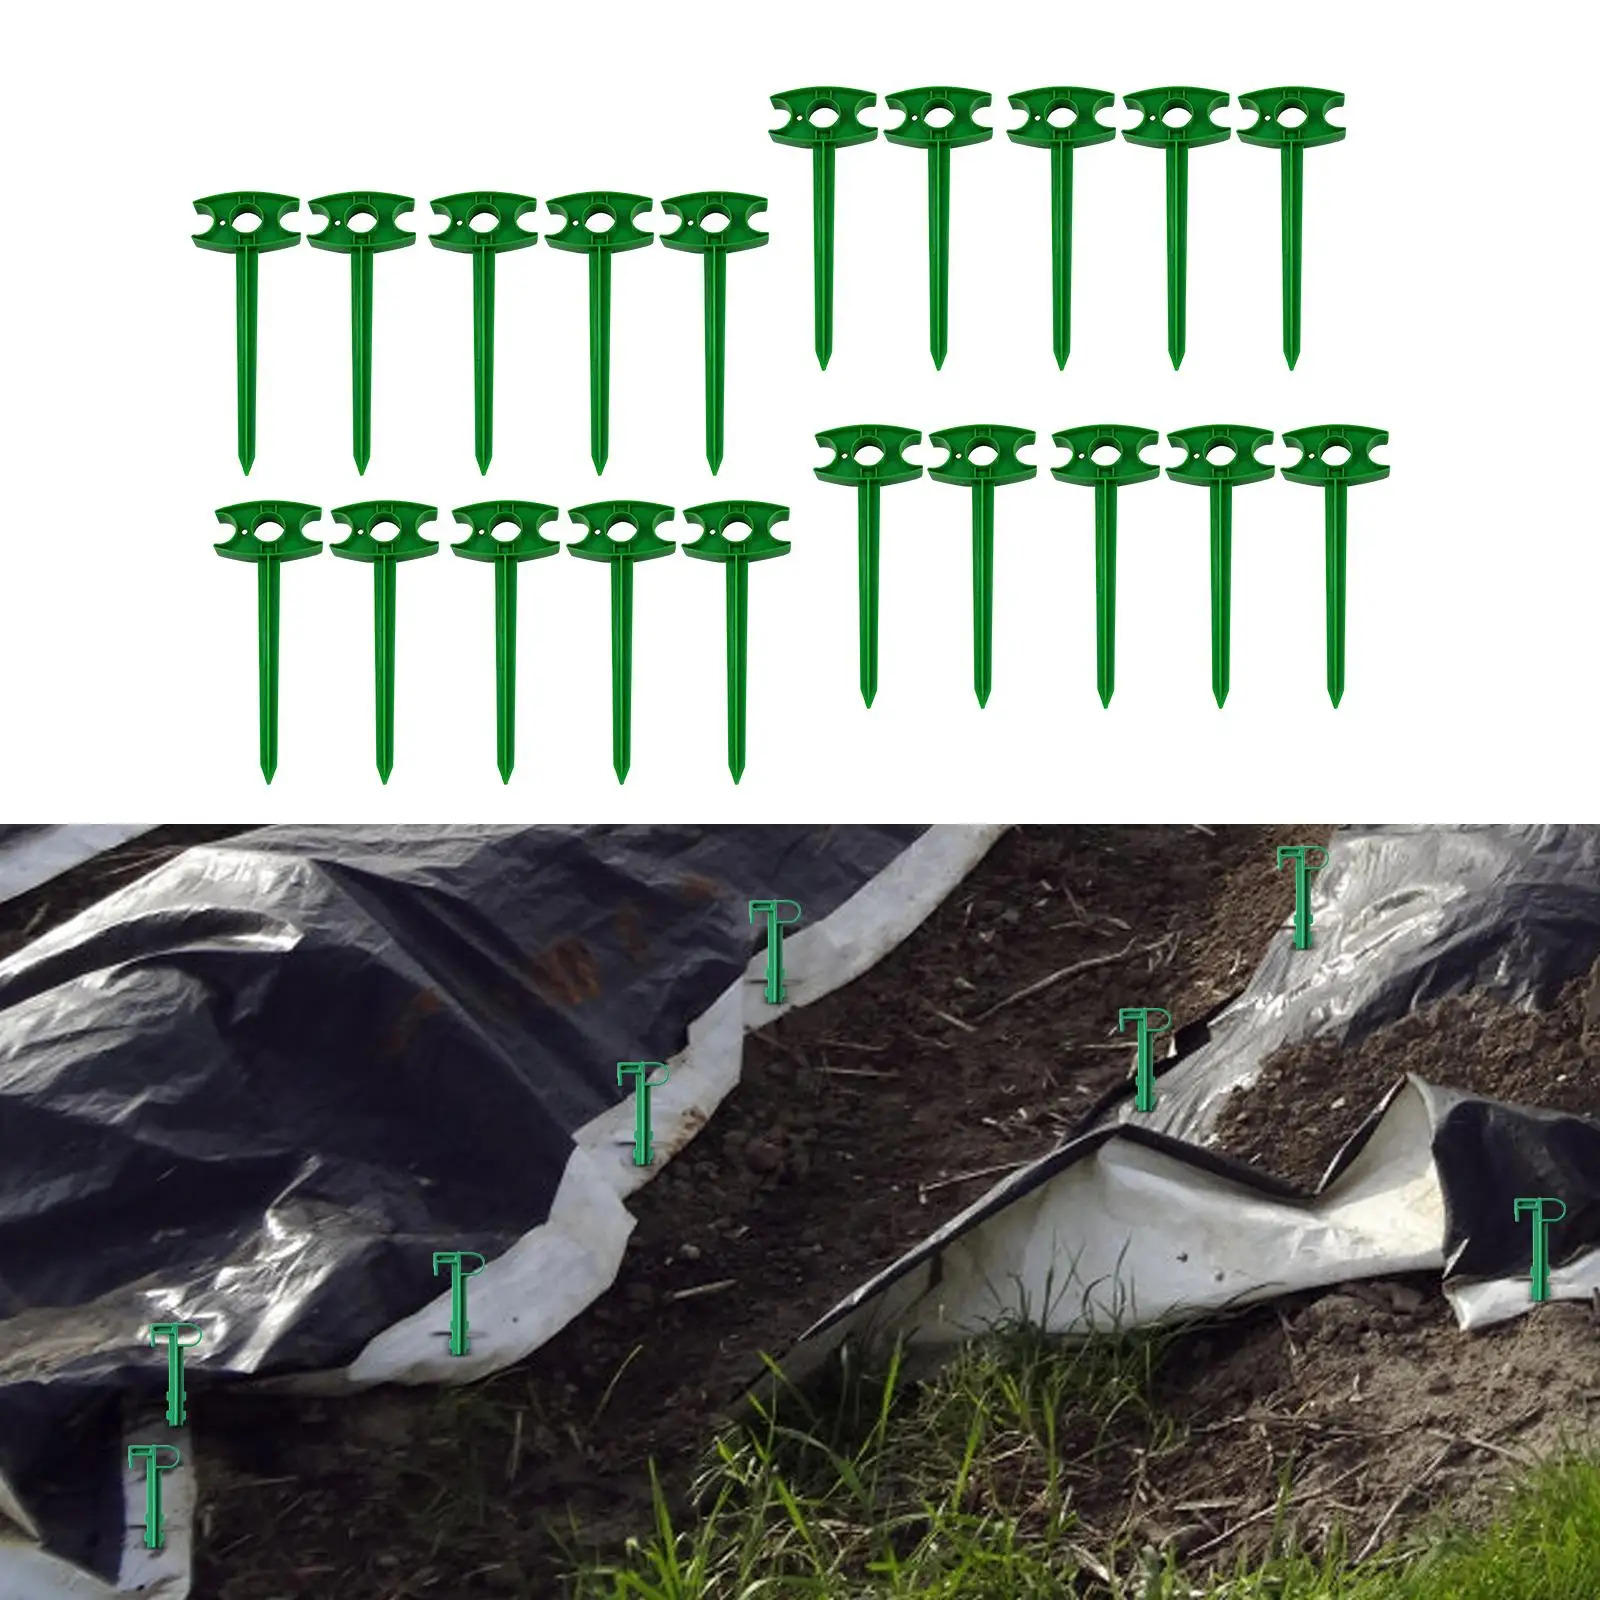 20 Landscape Stakes. Garden Stakes. 25cm Long Patio Ground Stakes, Ground Auger